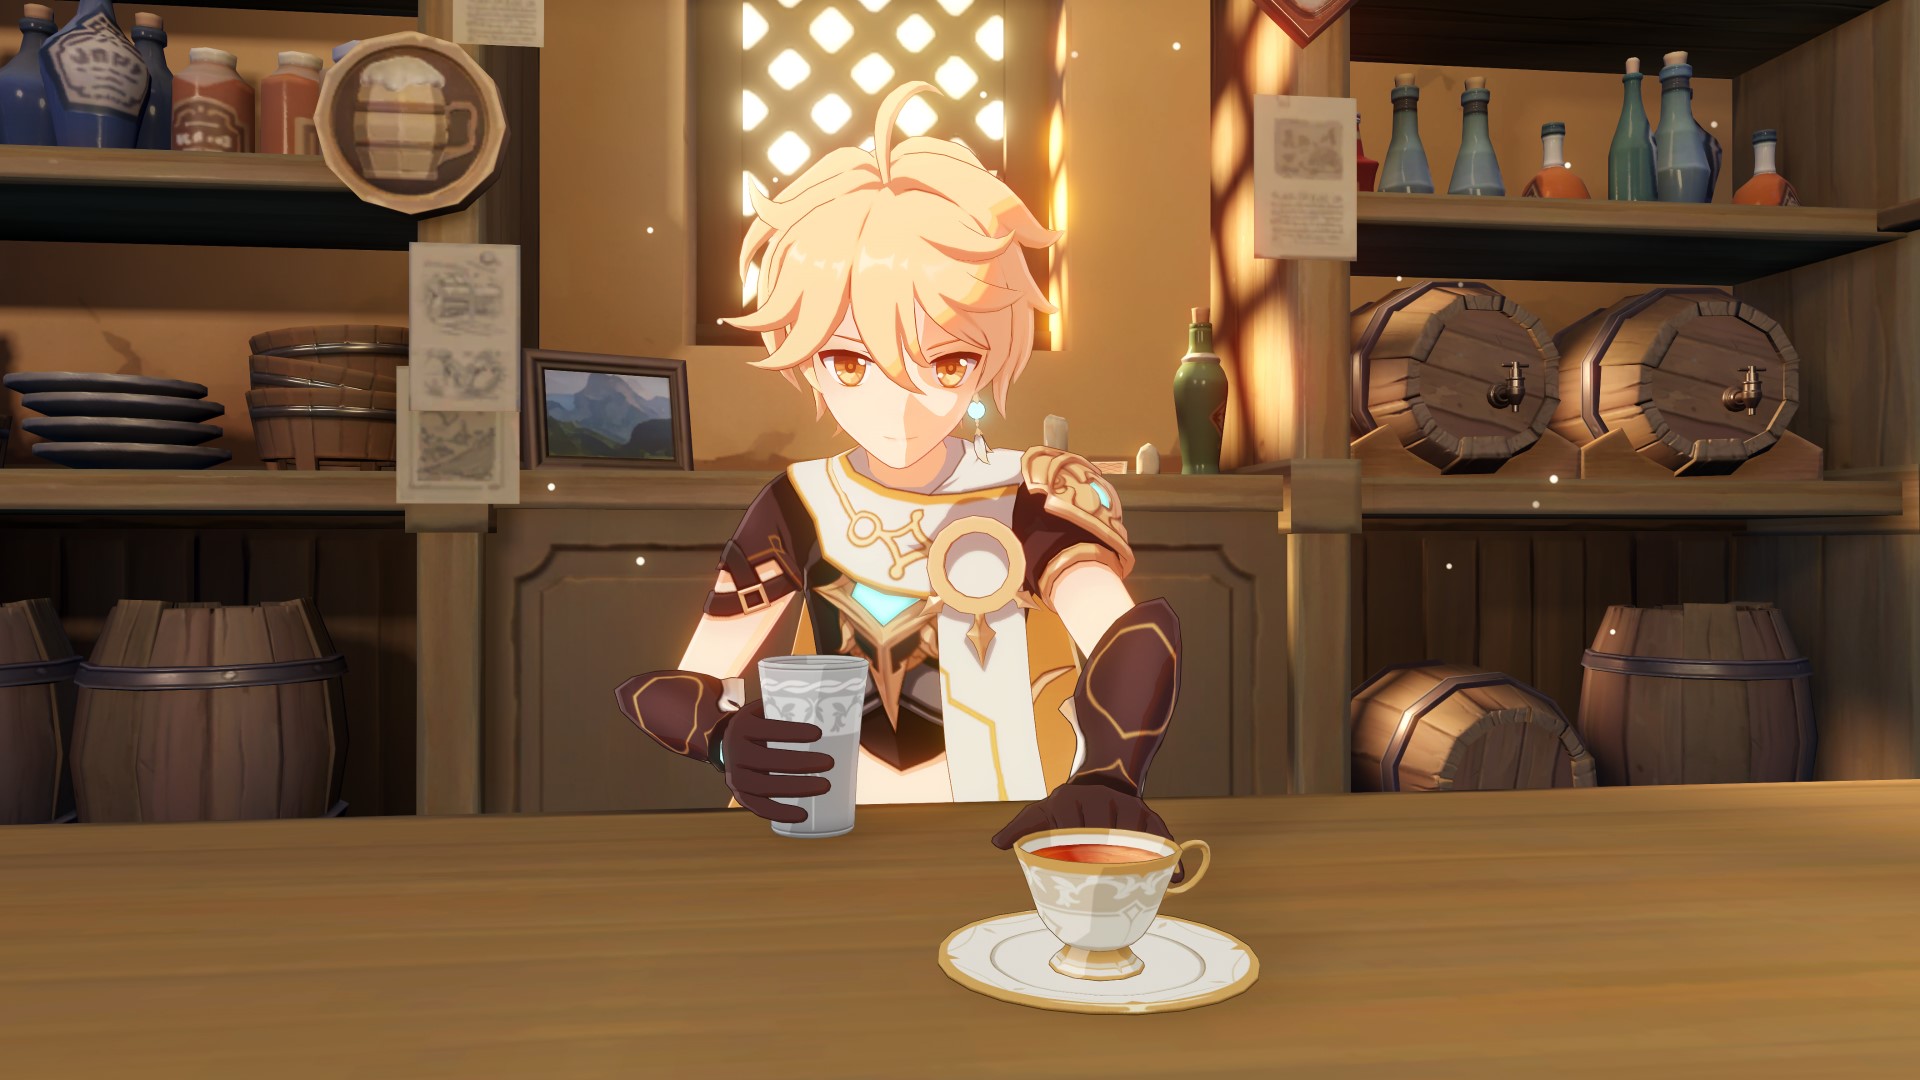 Genshin Impact 2.5 event where you make drinks and serve them